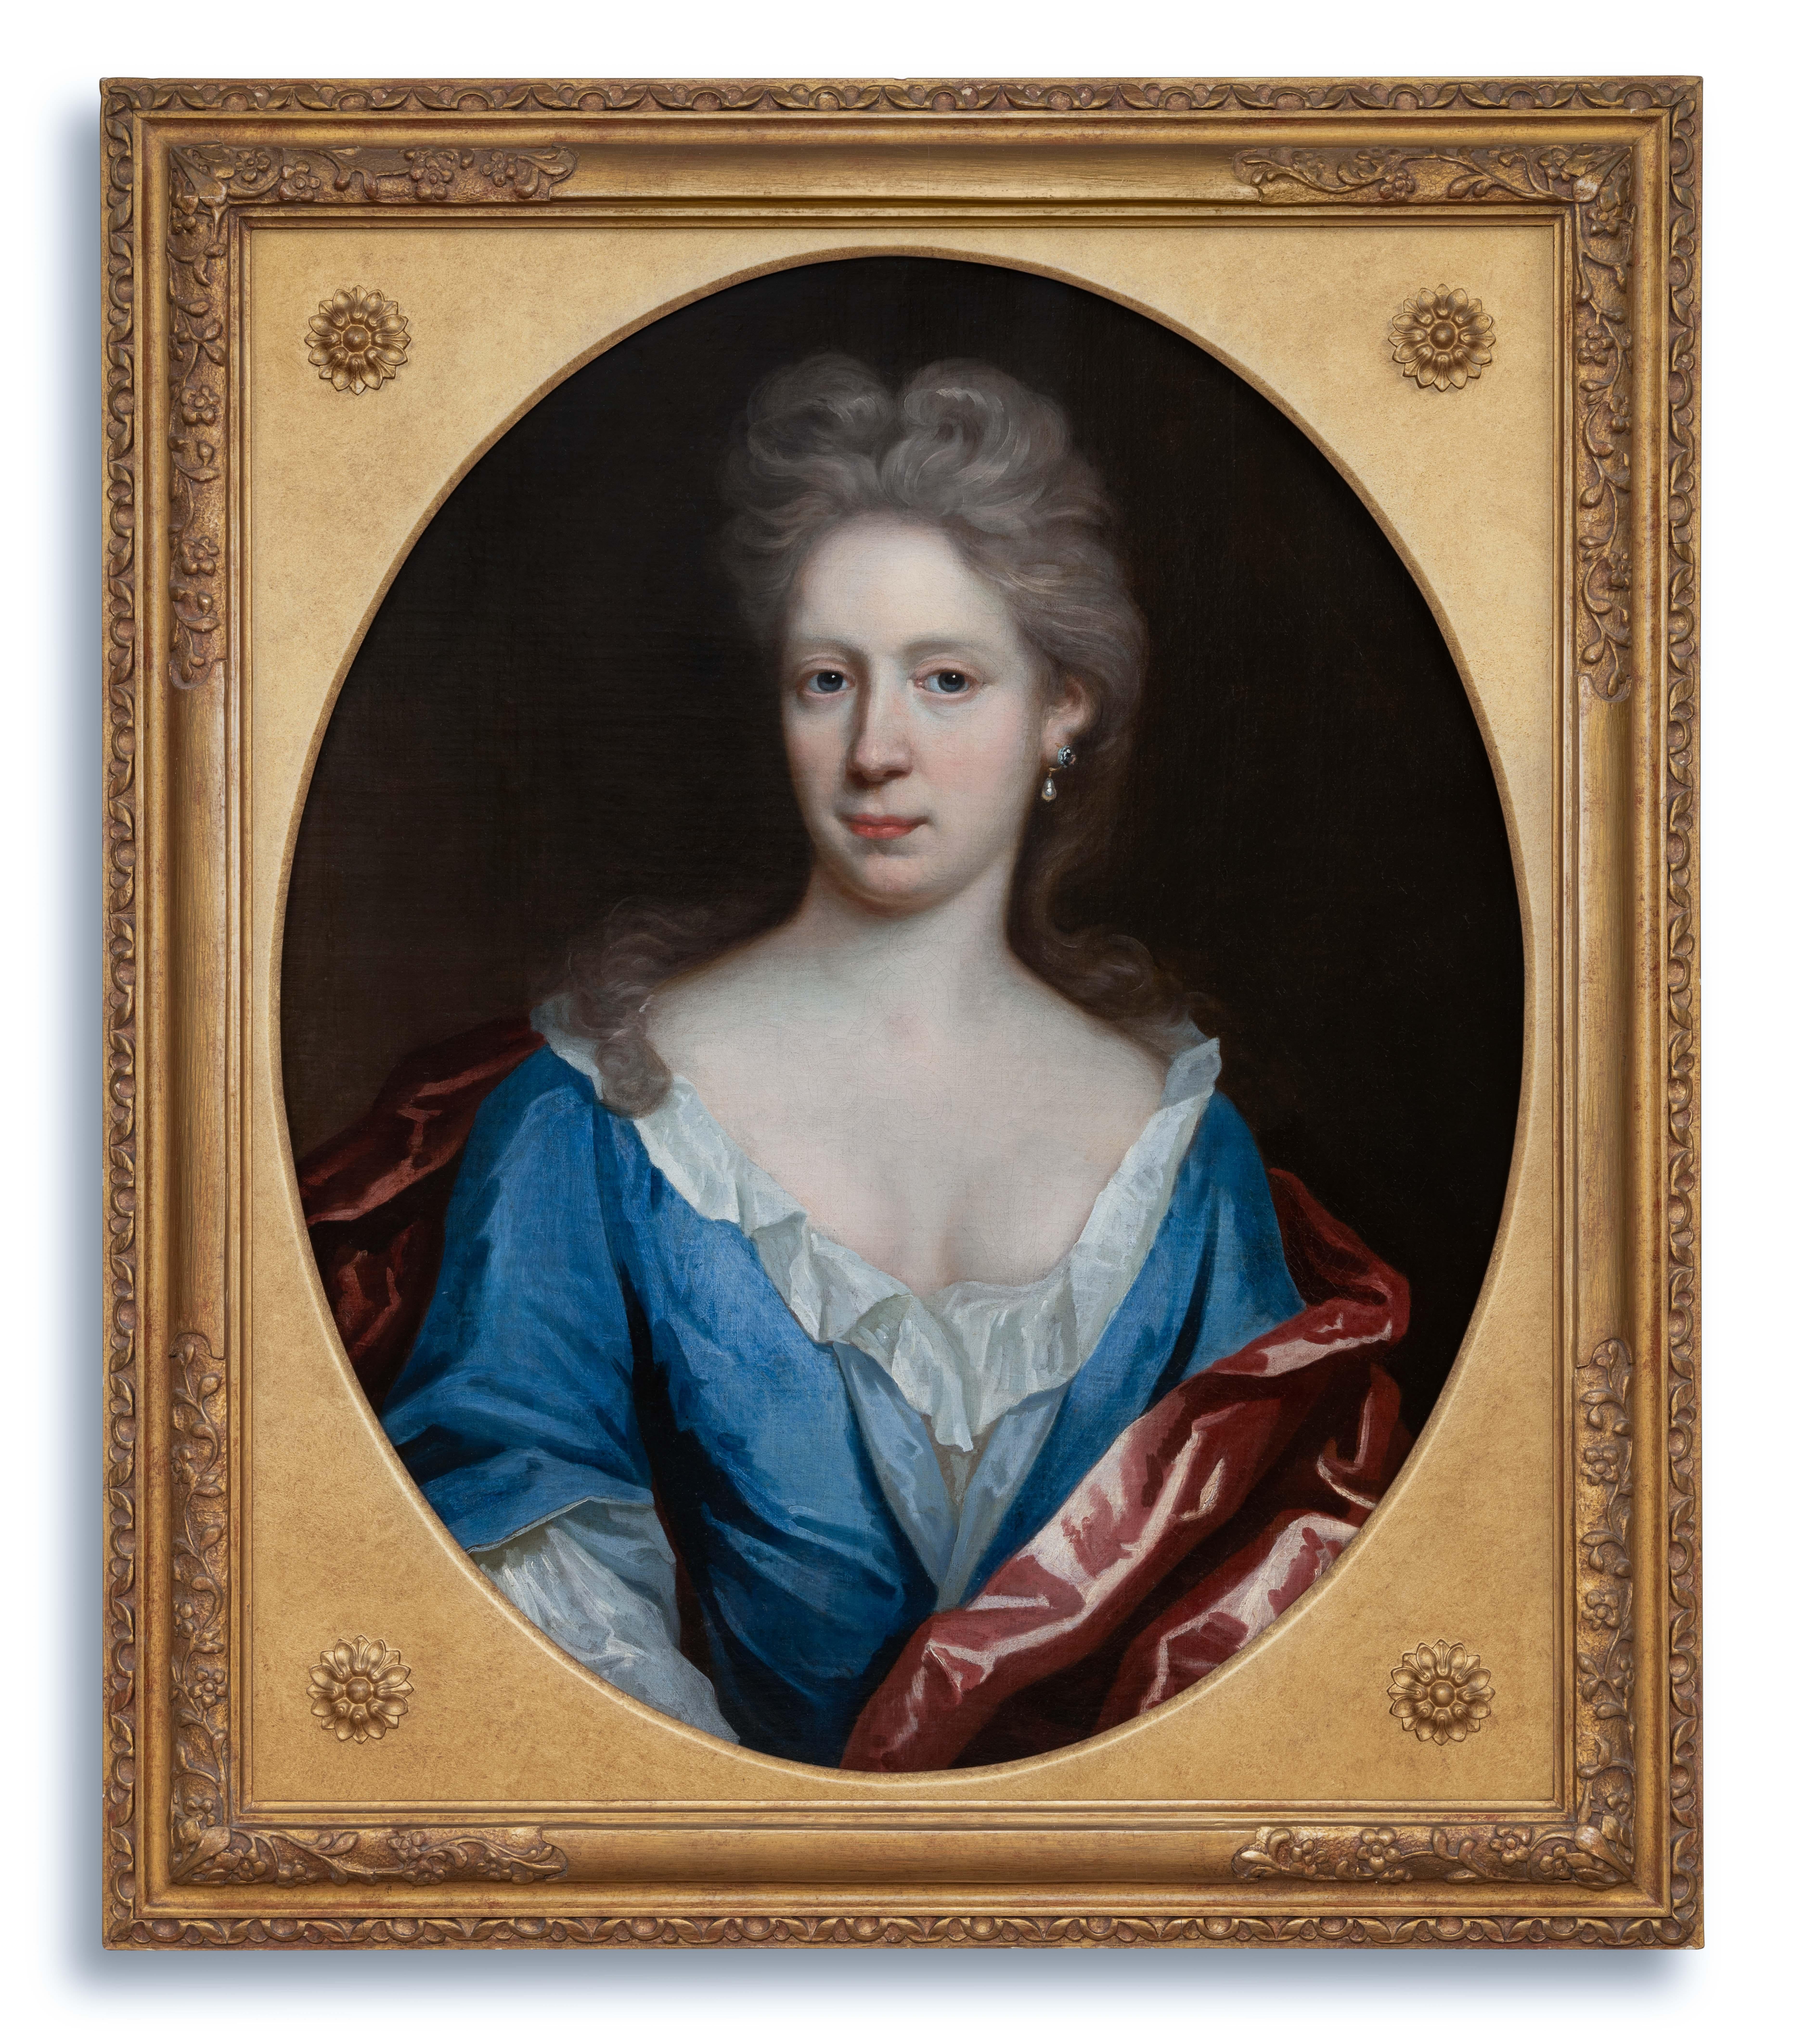 The sitter is elegantly attired in a blue silk dress over a white frilled chemise and a striking crimson mantle.  The artist, Thomas Murray, can be described as one of the most successful and talented during the last part of the seventeenth century.